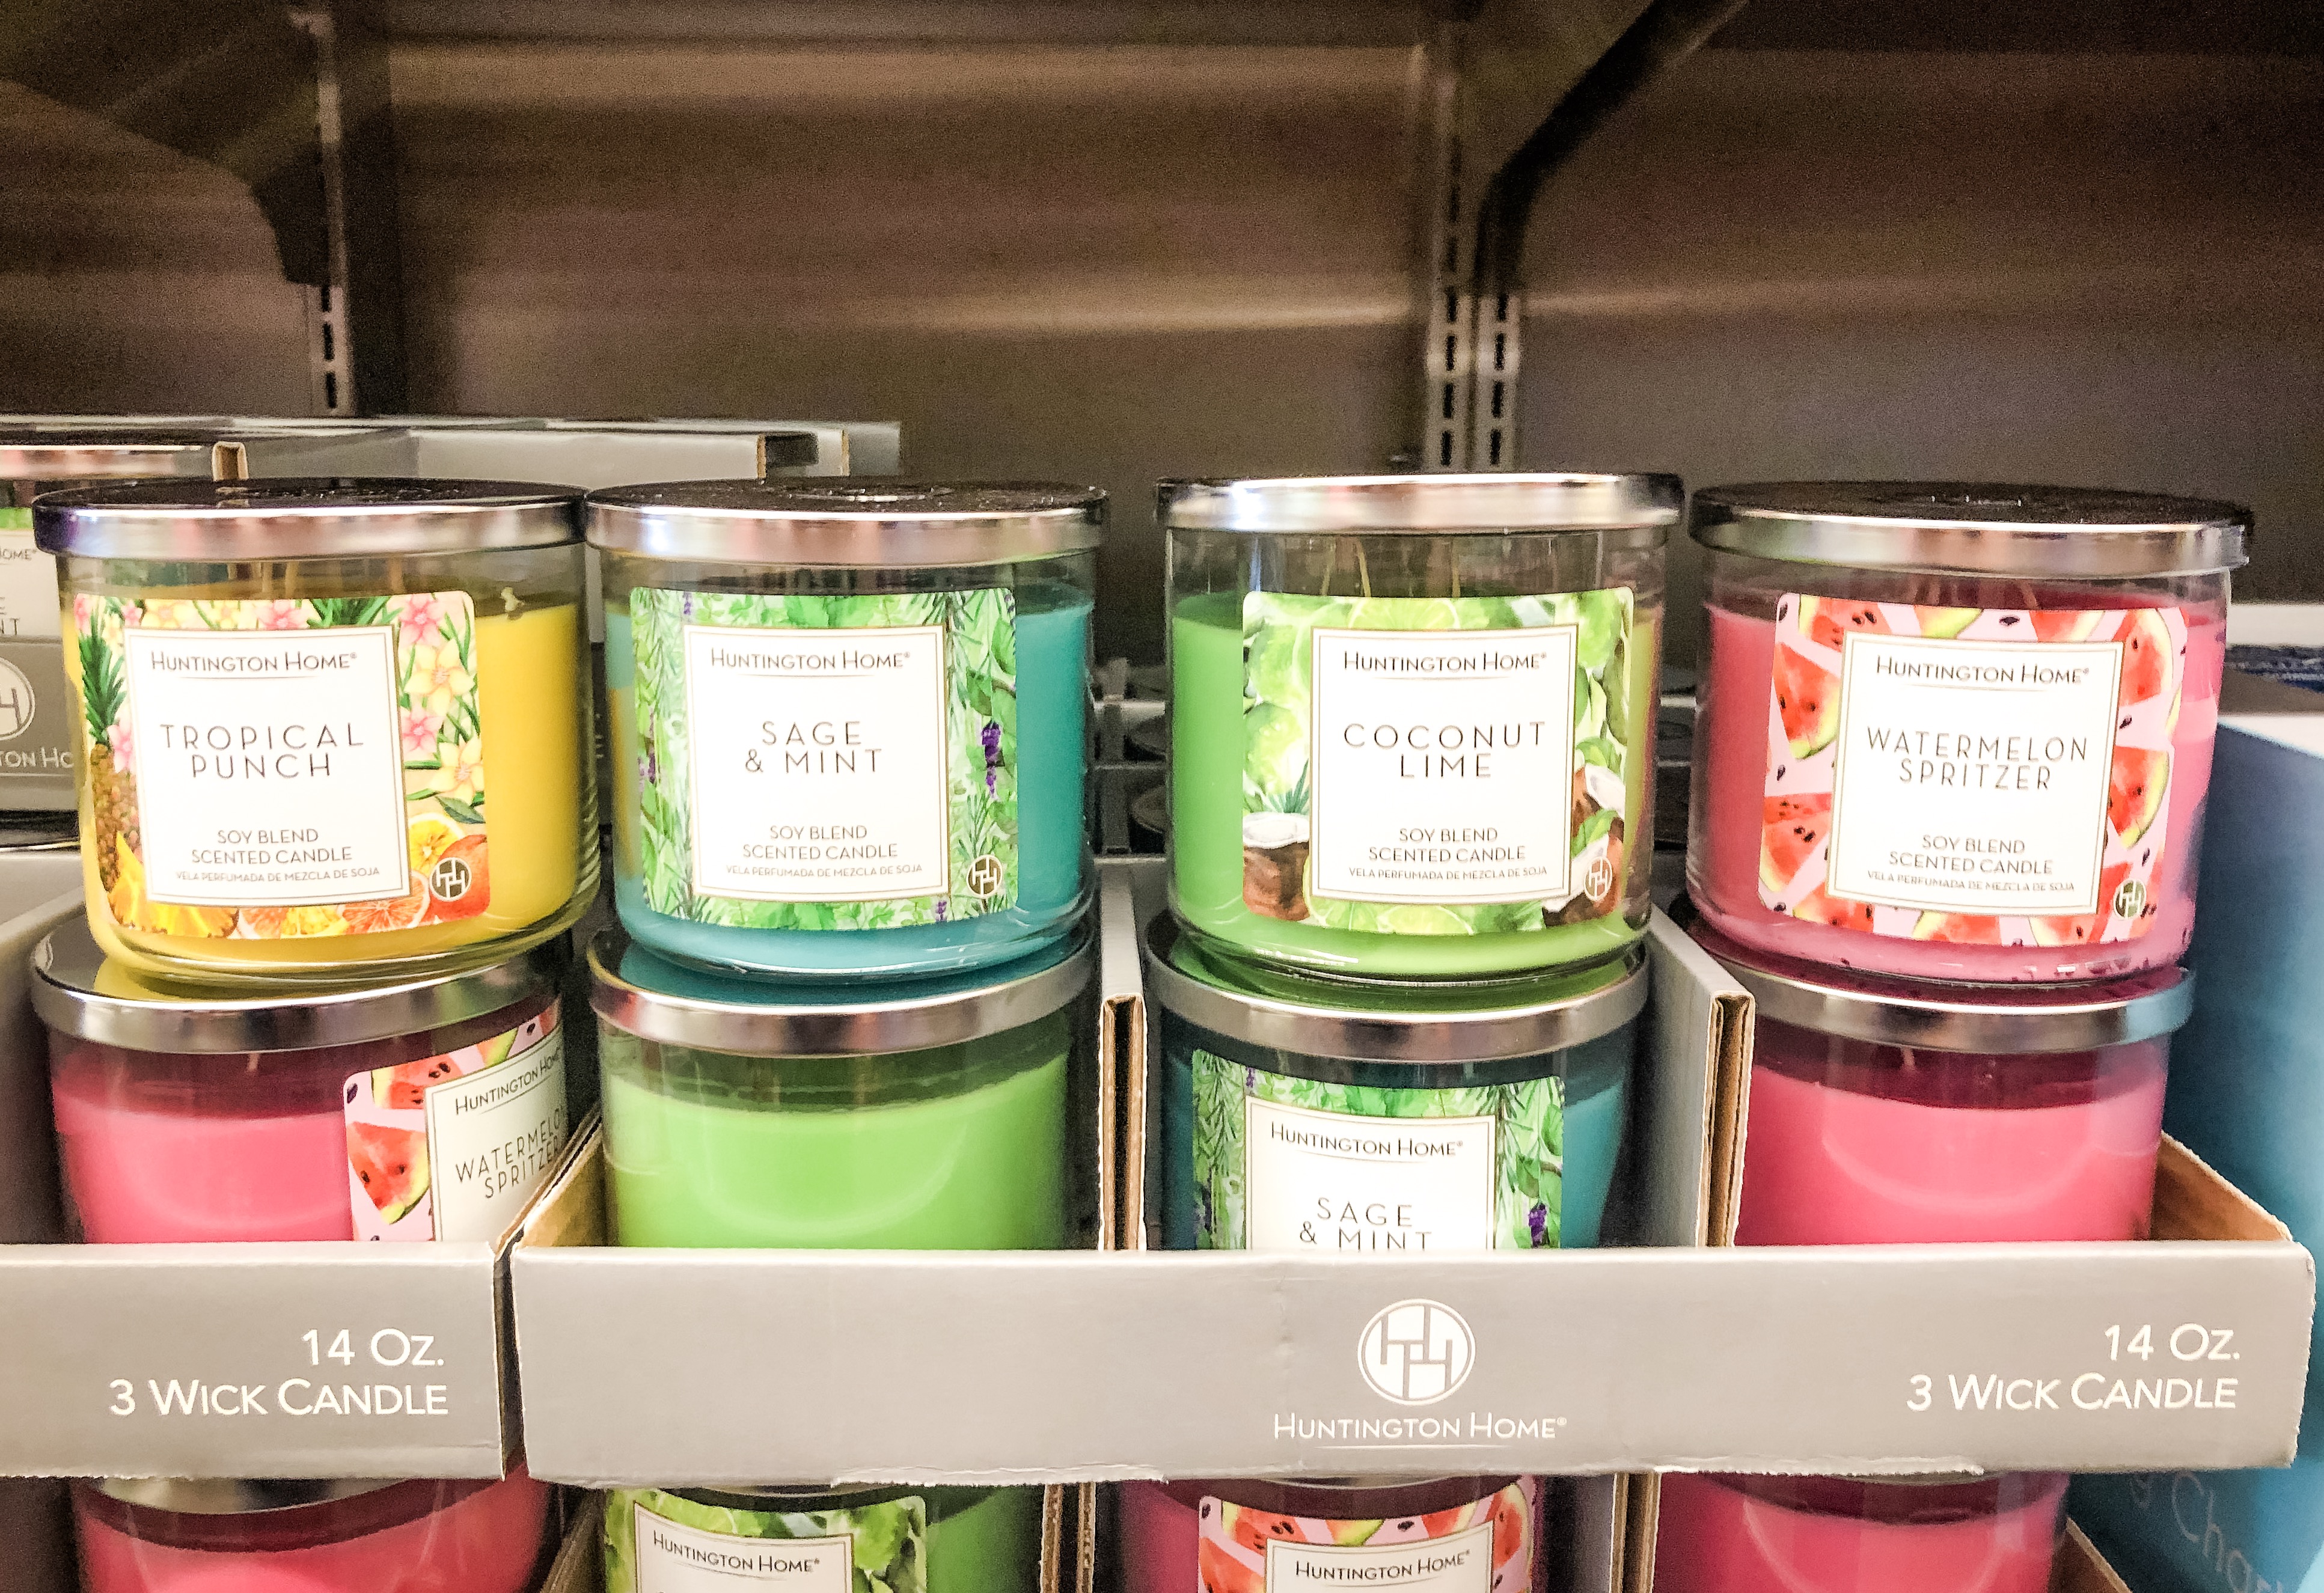 Bath & Body Works GARDEN SAGE & APPLE 3 Wick Scented Candle 14.5 oz NEW LOT OF 2 